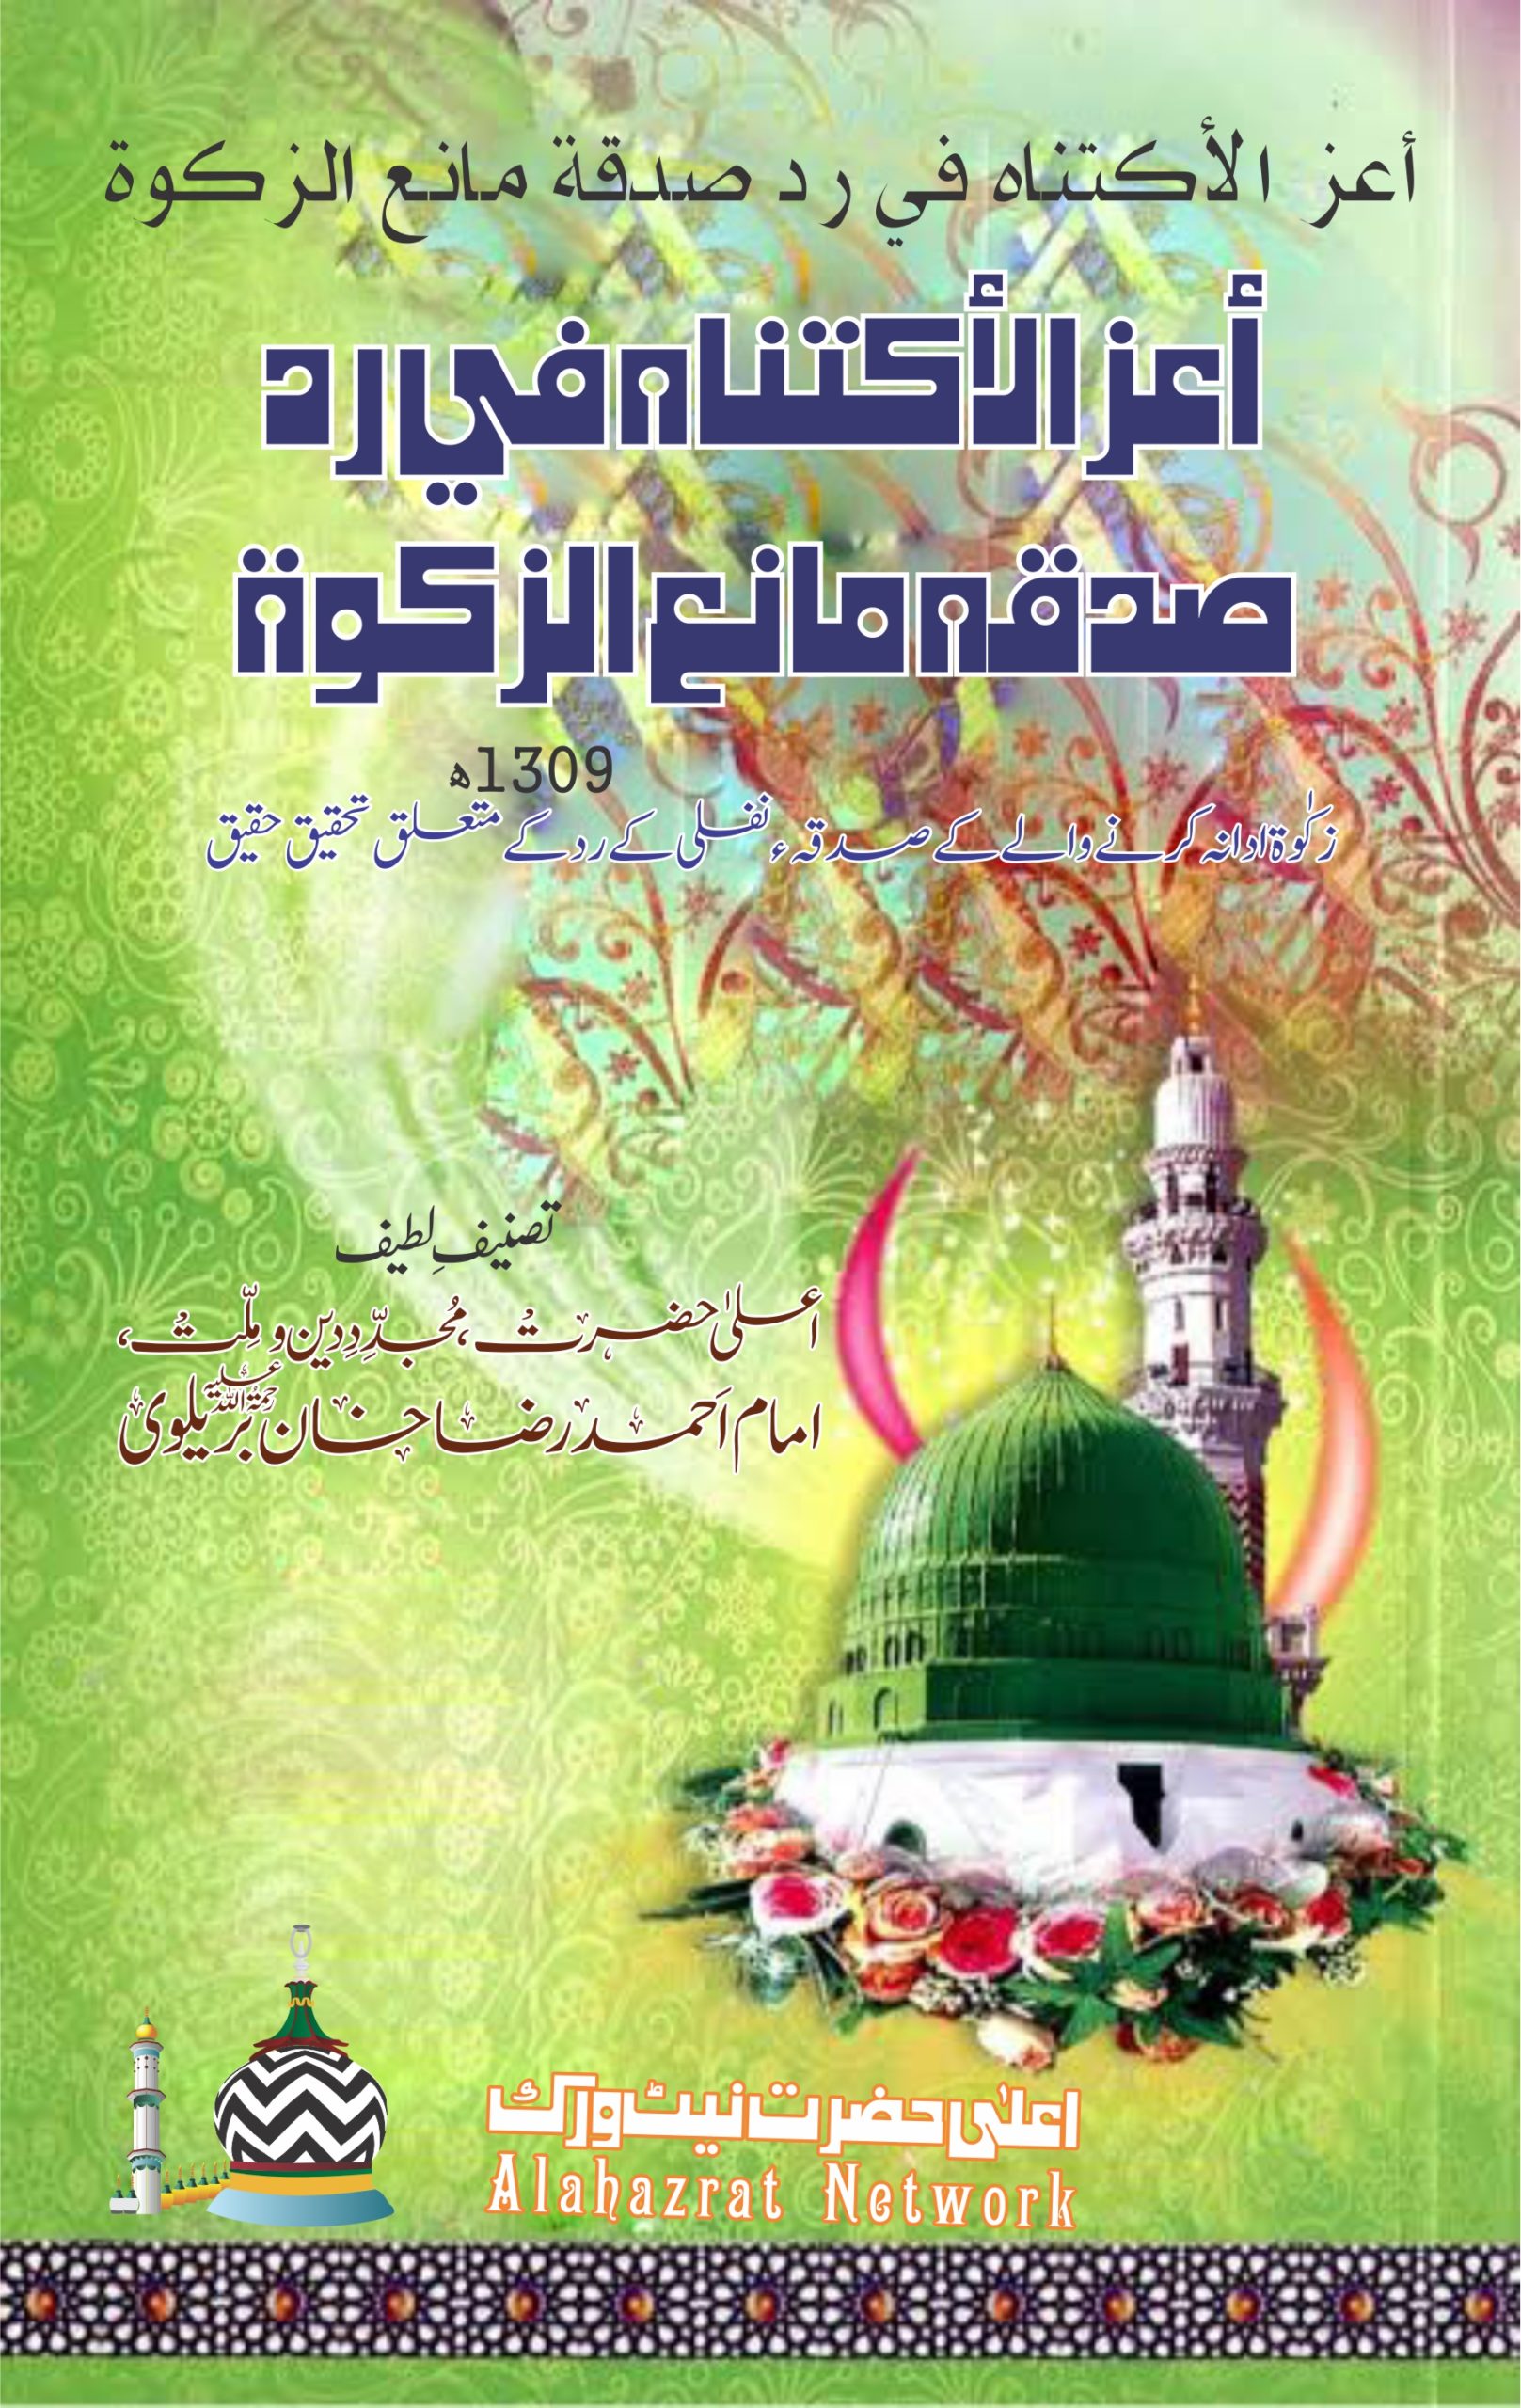 All Downloads Archives » Page 16 of 19 » Alahazrat Network